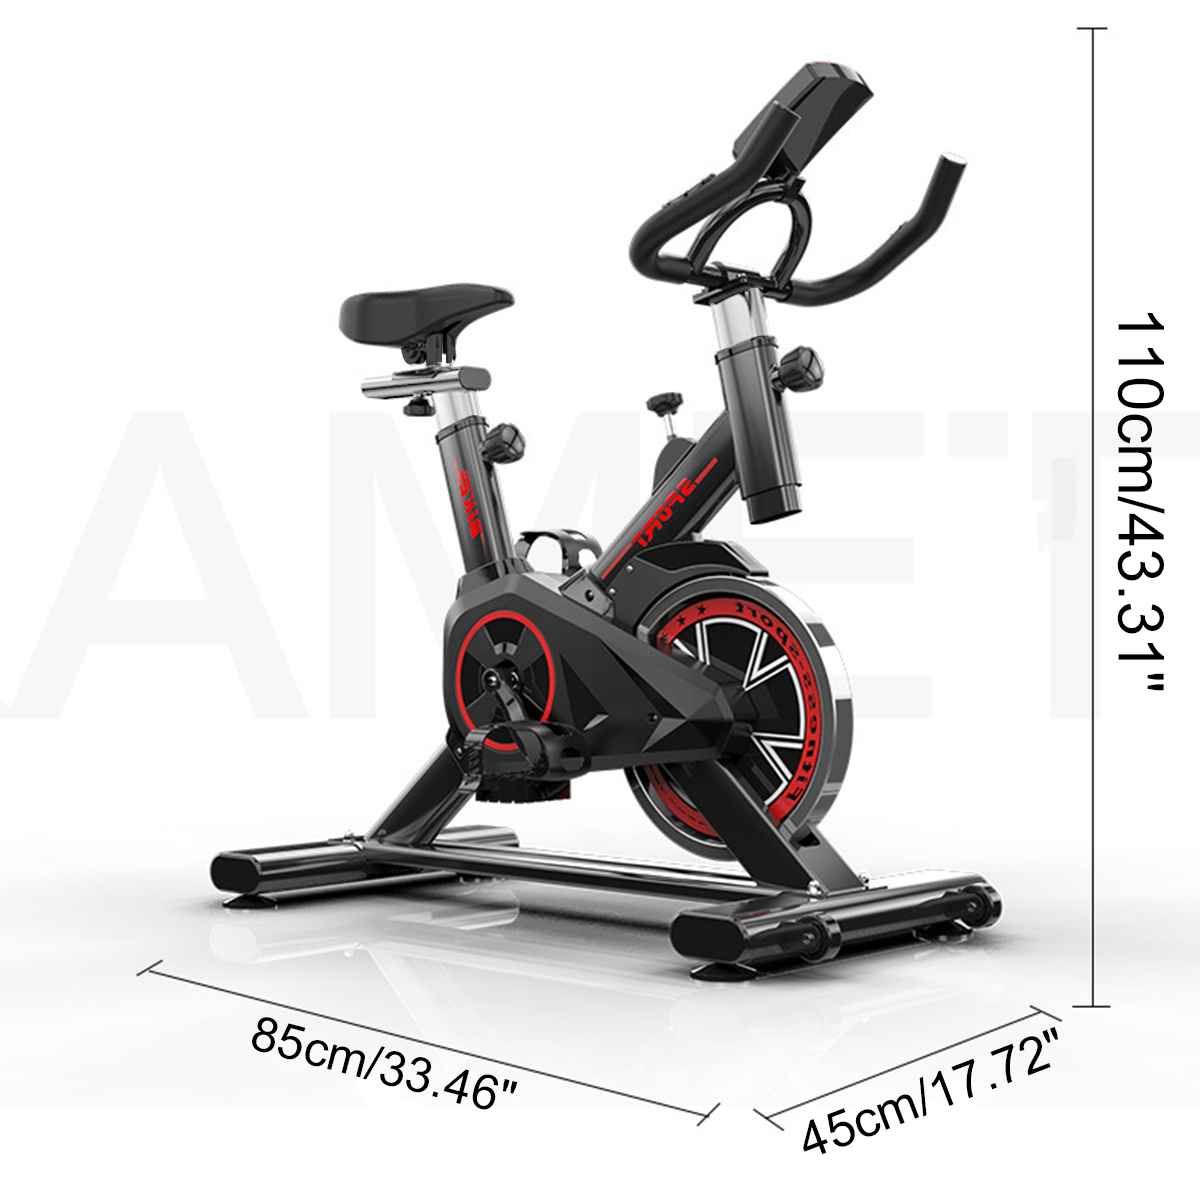 Exercise-Spinning-Bike-Professional-Home-Cycling-Fitness-Bicycle-Belt-Drive-1707253-8